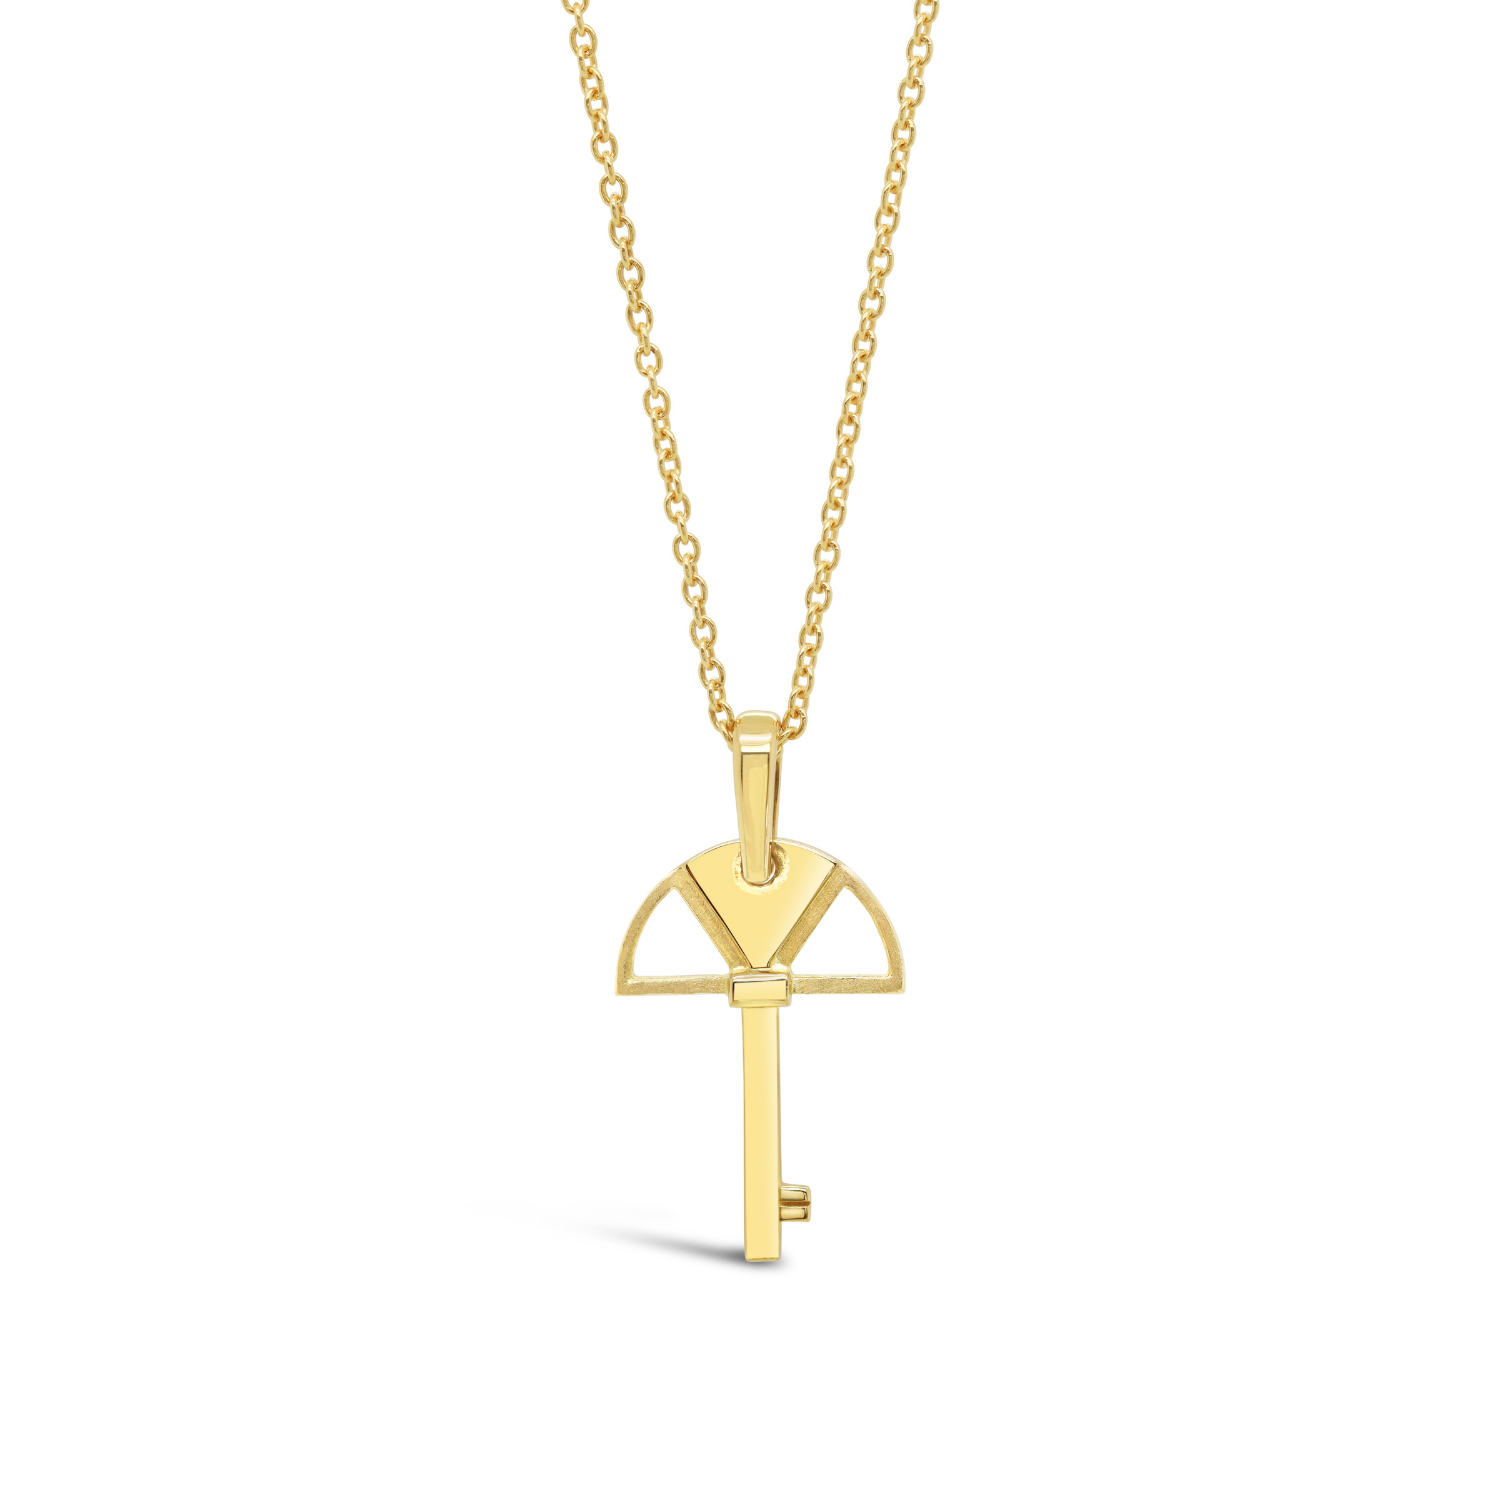 Art Deco Inspired Key Pendant Yellow Gold Necklace